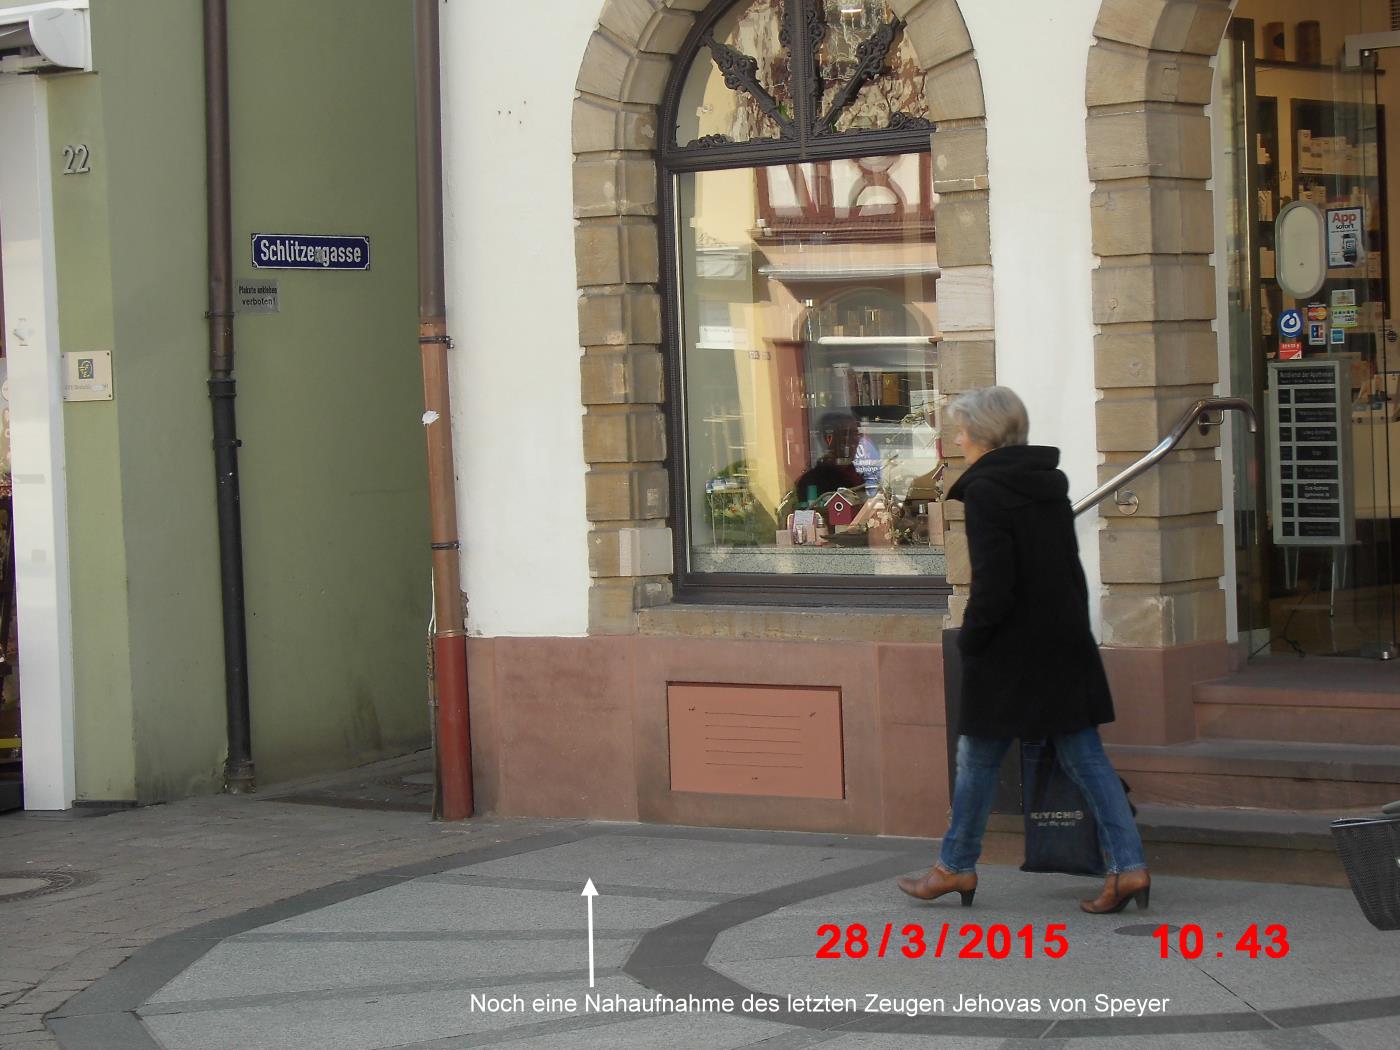 Jehovah lives in Wiesloch – Jehovah's Witnesses already think in Bruchsal and Speyer!